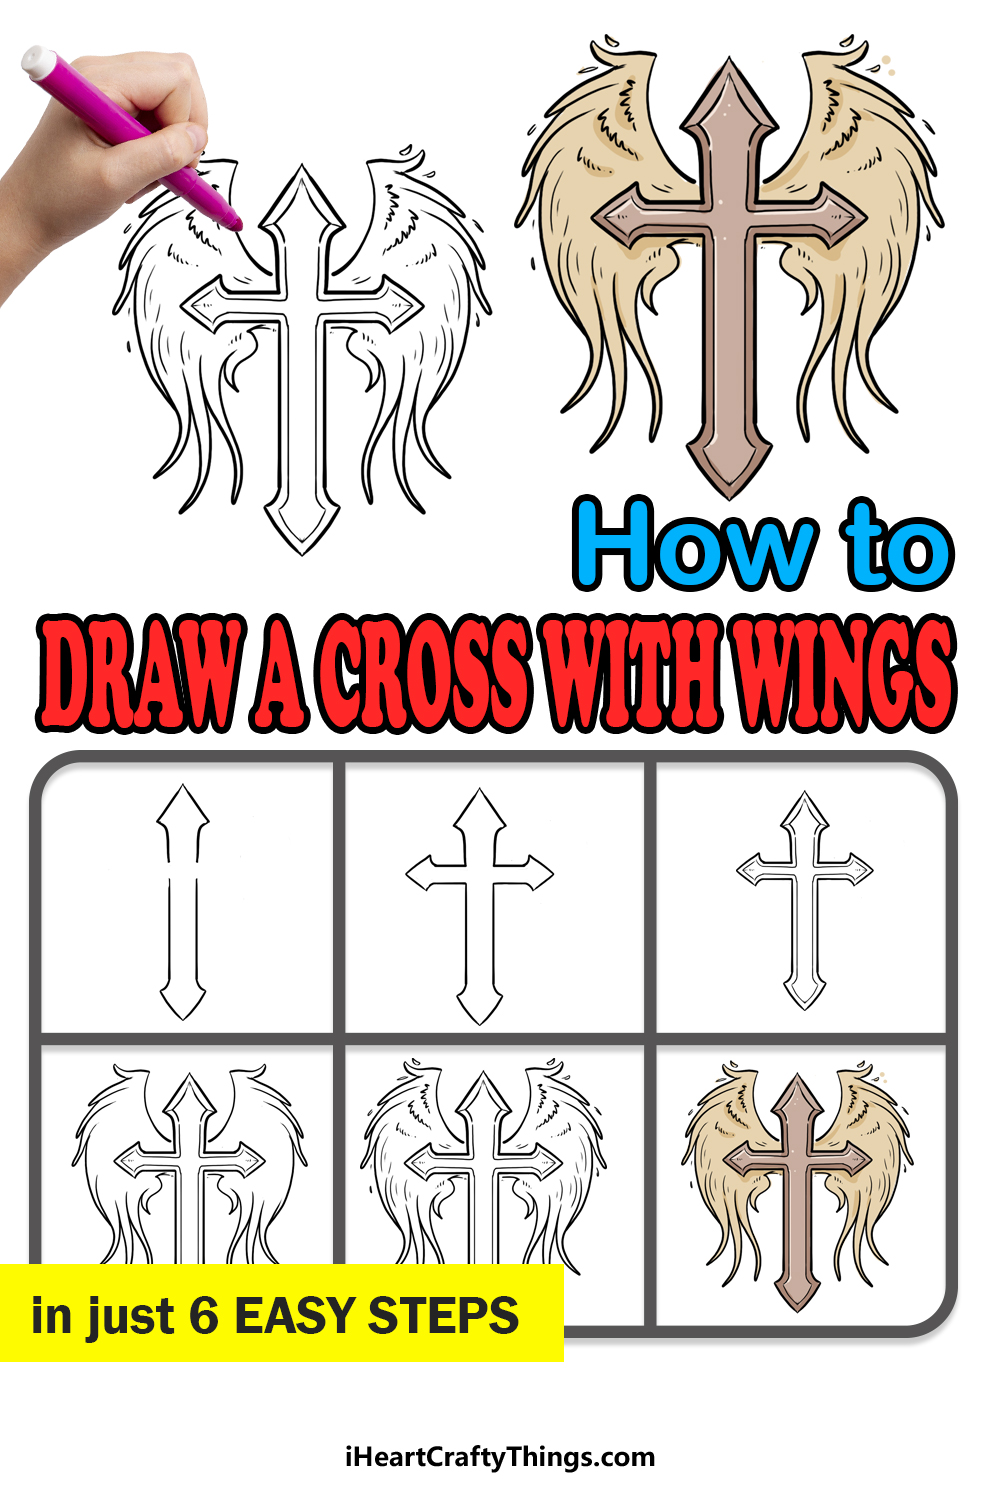 How to Draw A Cross With Wings step by step guide